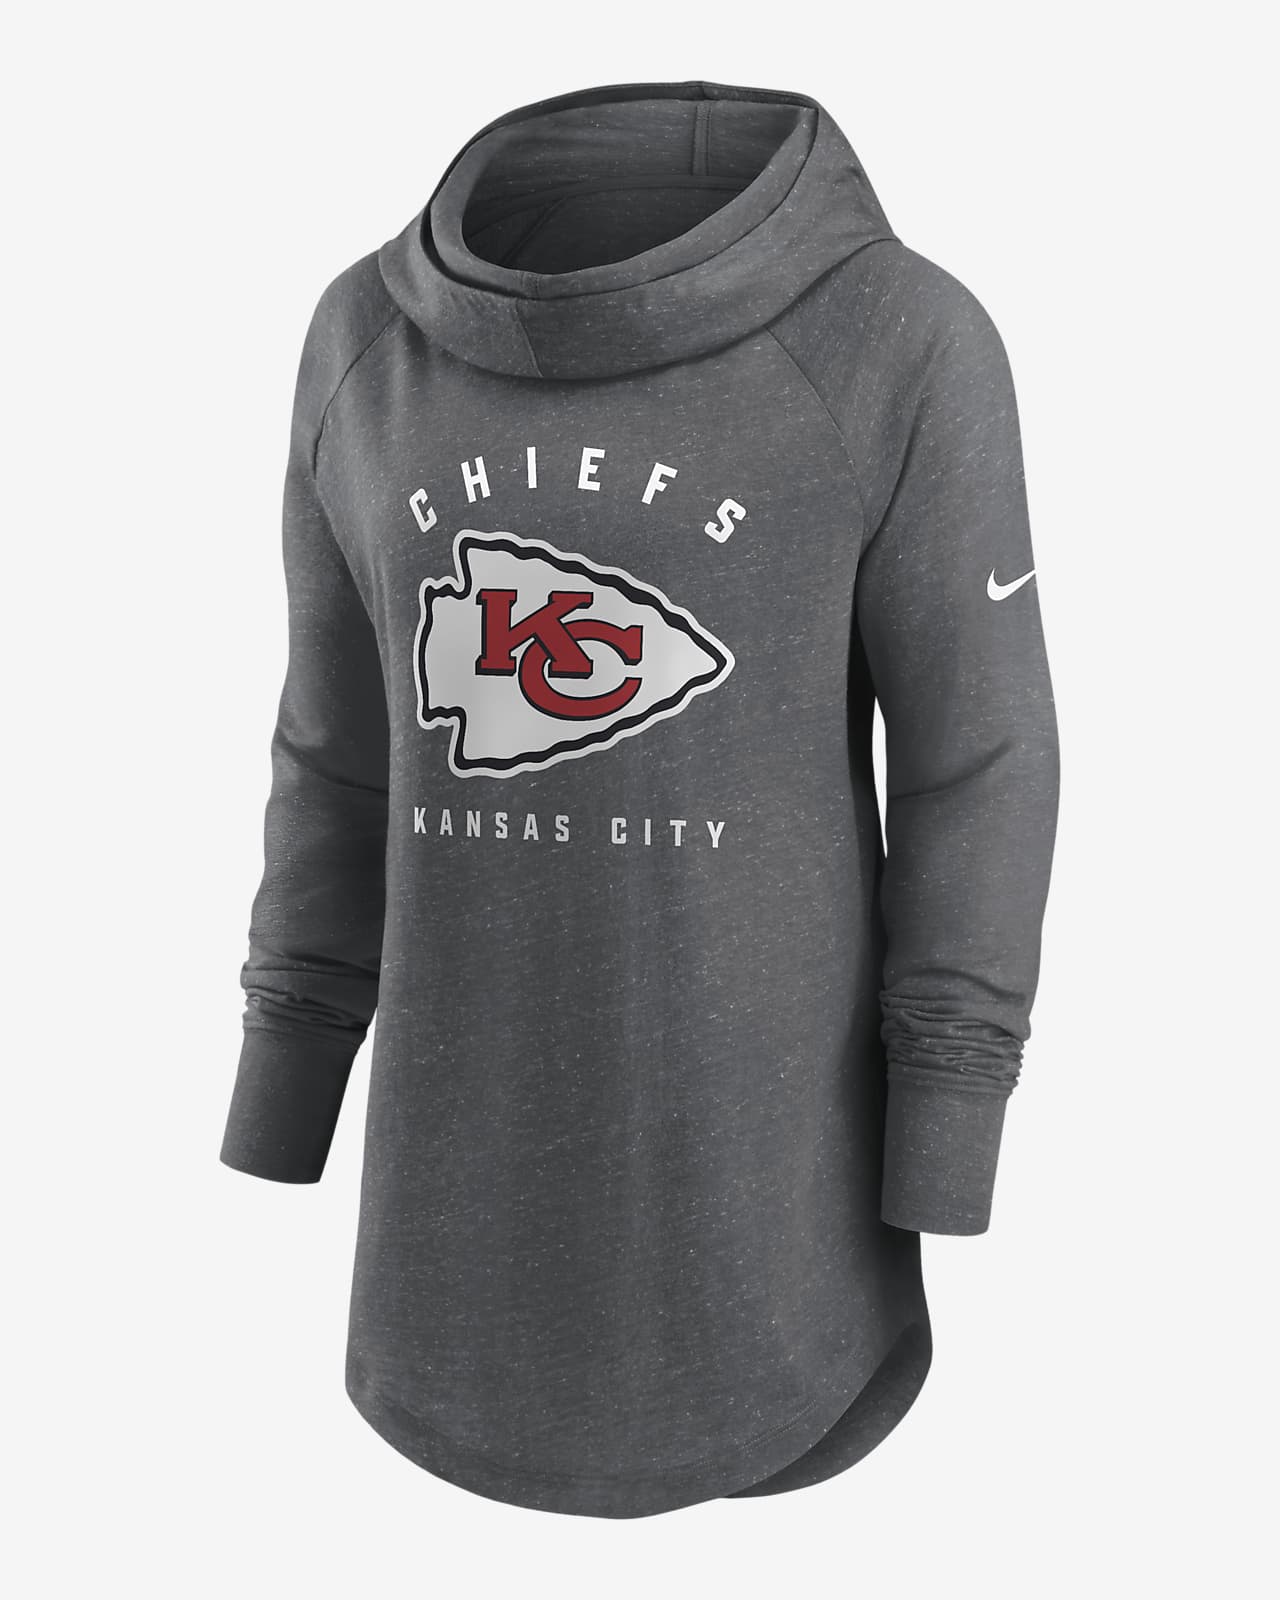 Nike Women's Team (NFL Kansas City Chiefs) Pullover Hoodie in Grey, Size: Small | NKZE07F7G-06G